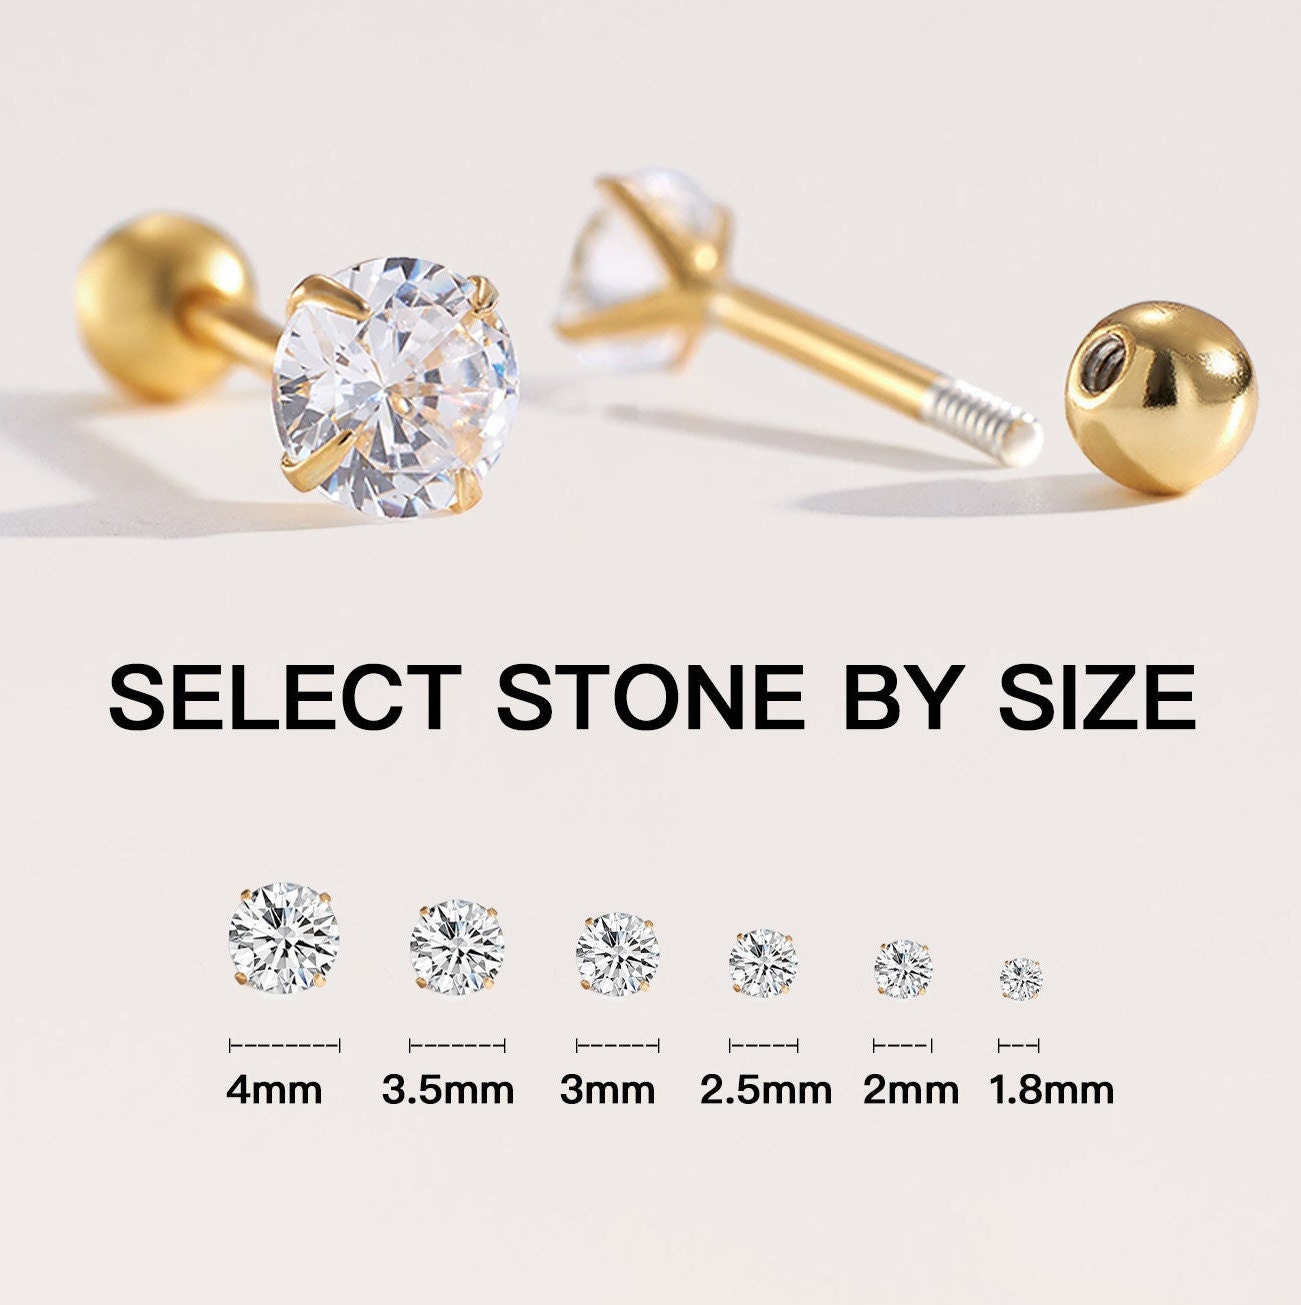 Tiny Stud Earrings, Screw Back Earrings, Small Studs, Sparly Cz Crystals,  Gold Stud Earrings, Cartilage Studs, 1.5mm, 2mm, 2.5mm, 3mm, 4mm 